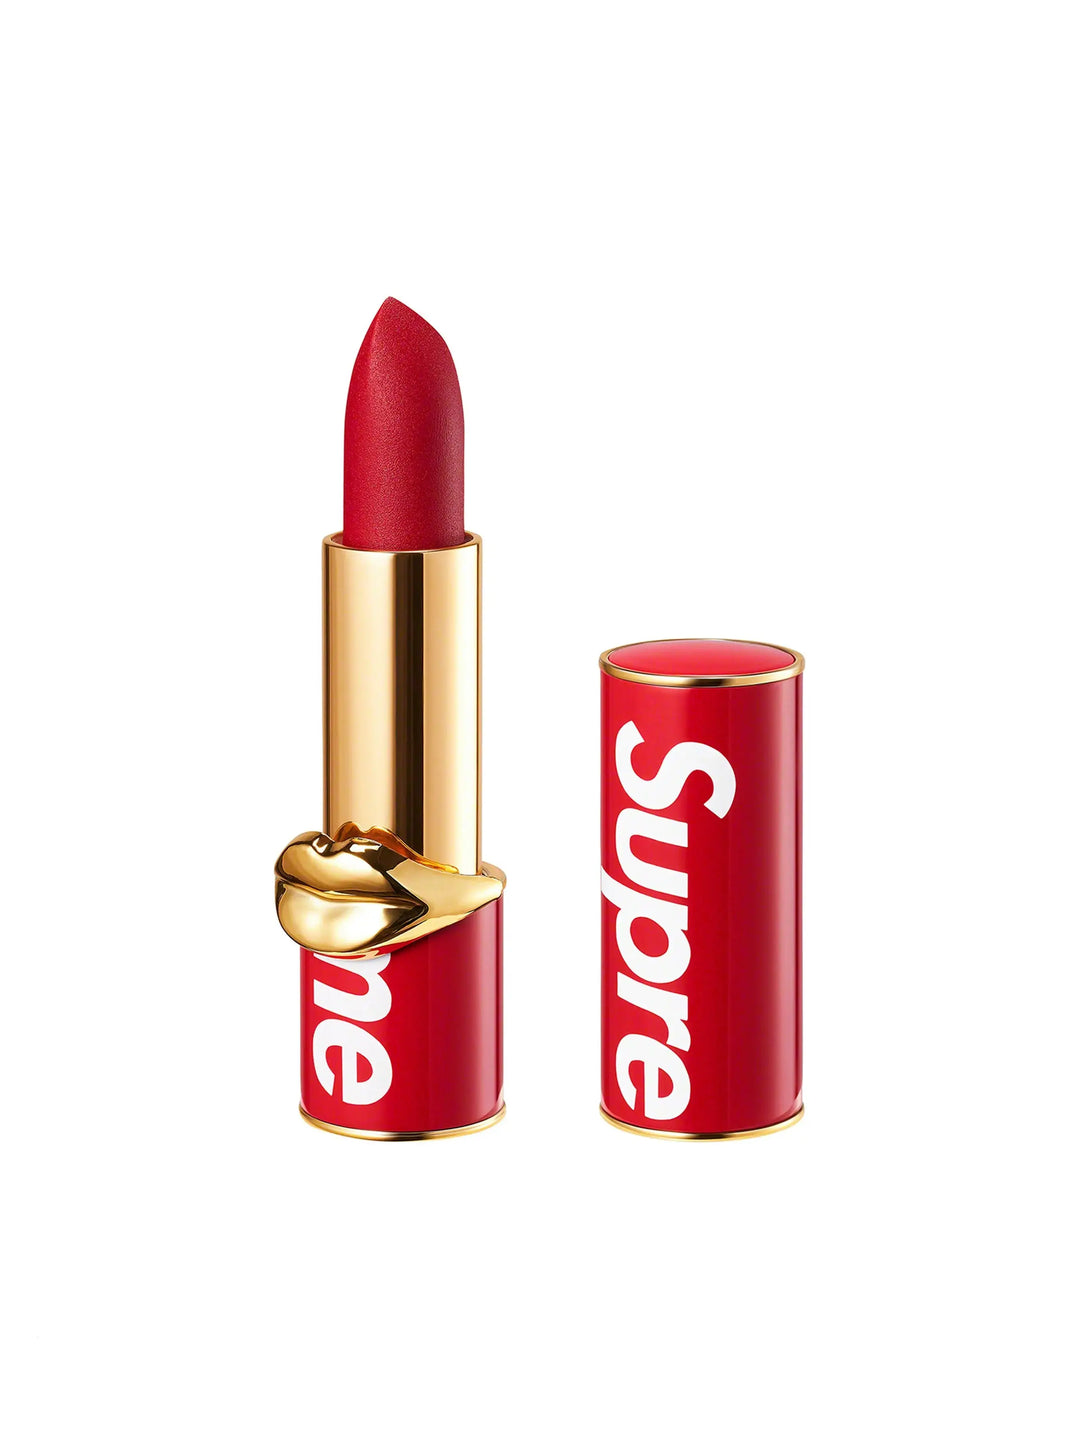 Supreme Pat McGrath Labs Lipstick Red in Auckland, New Zealand - Shop name